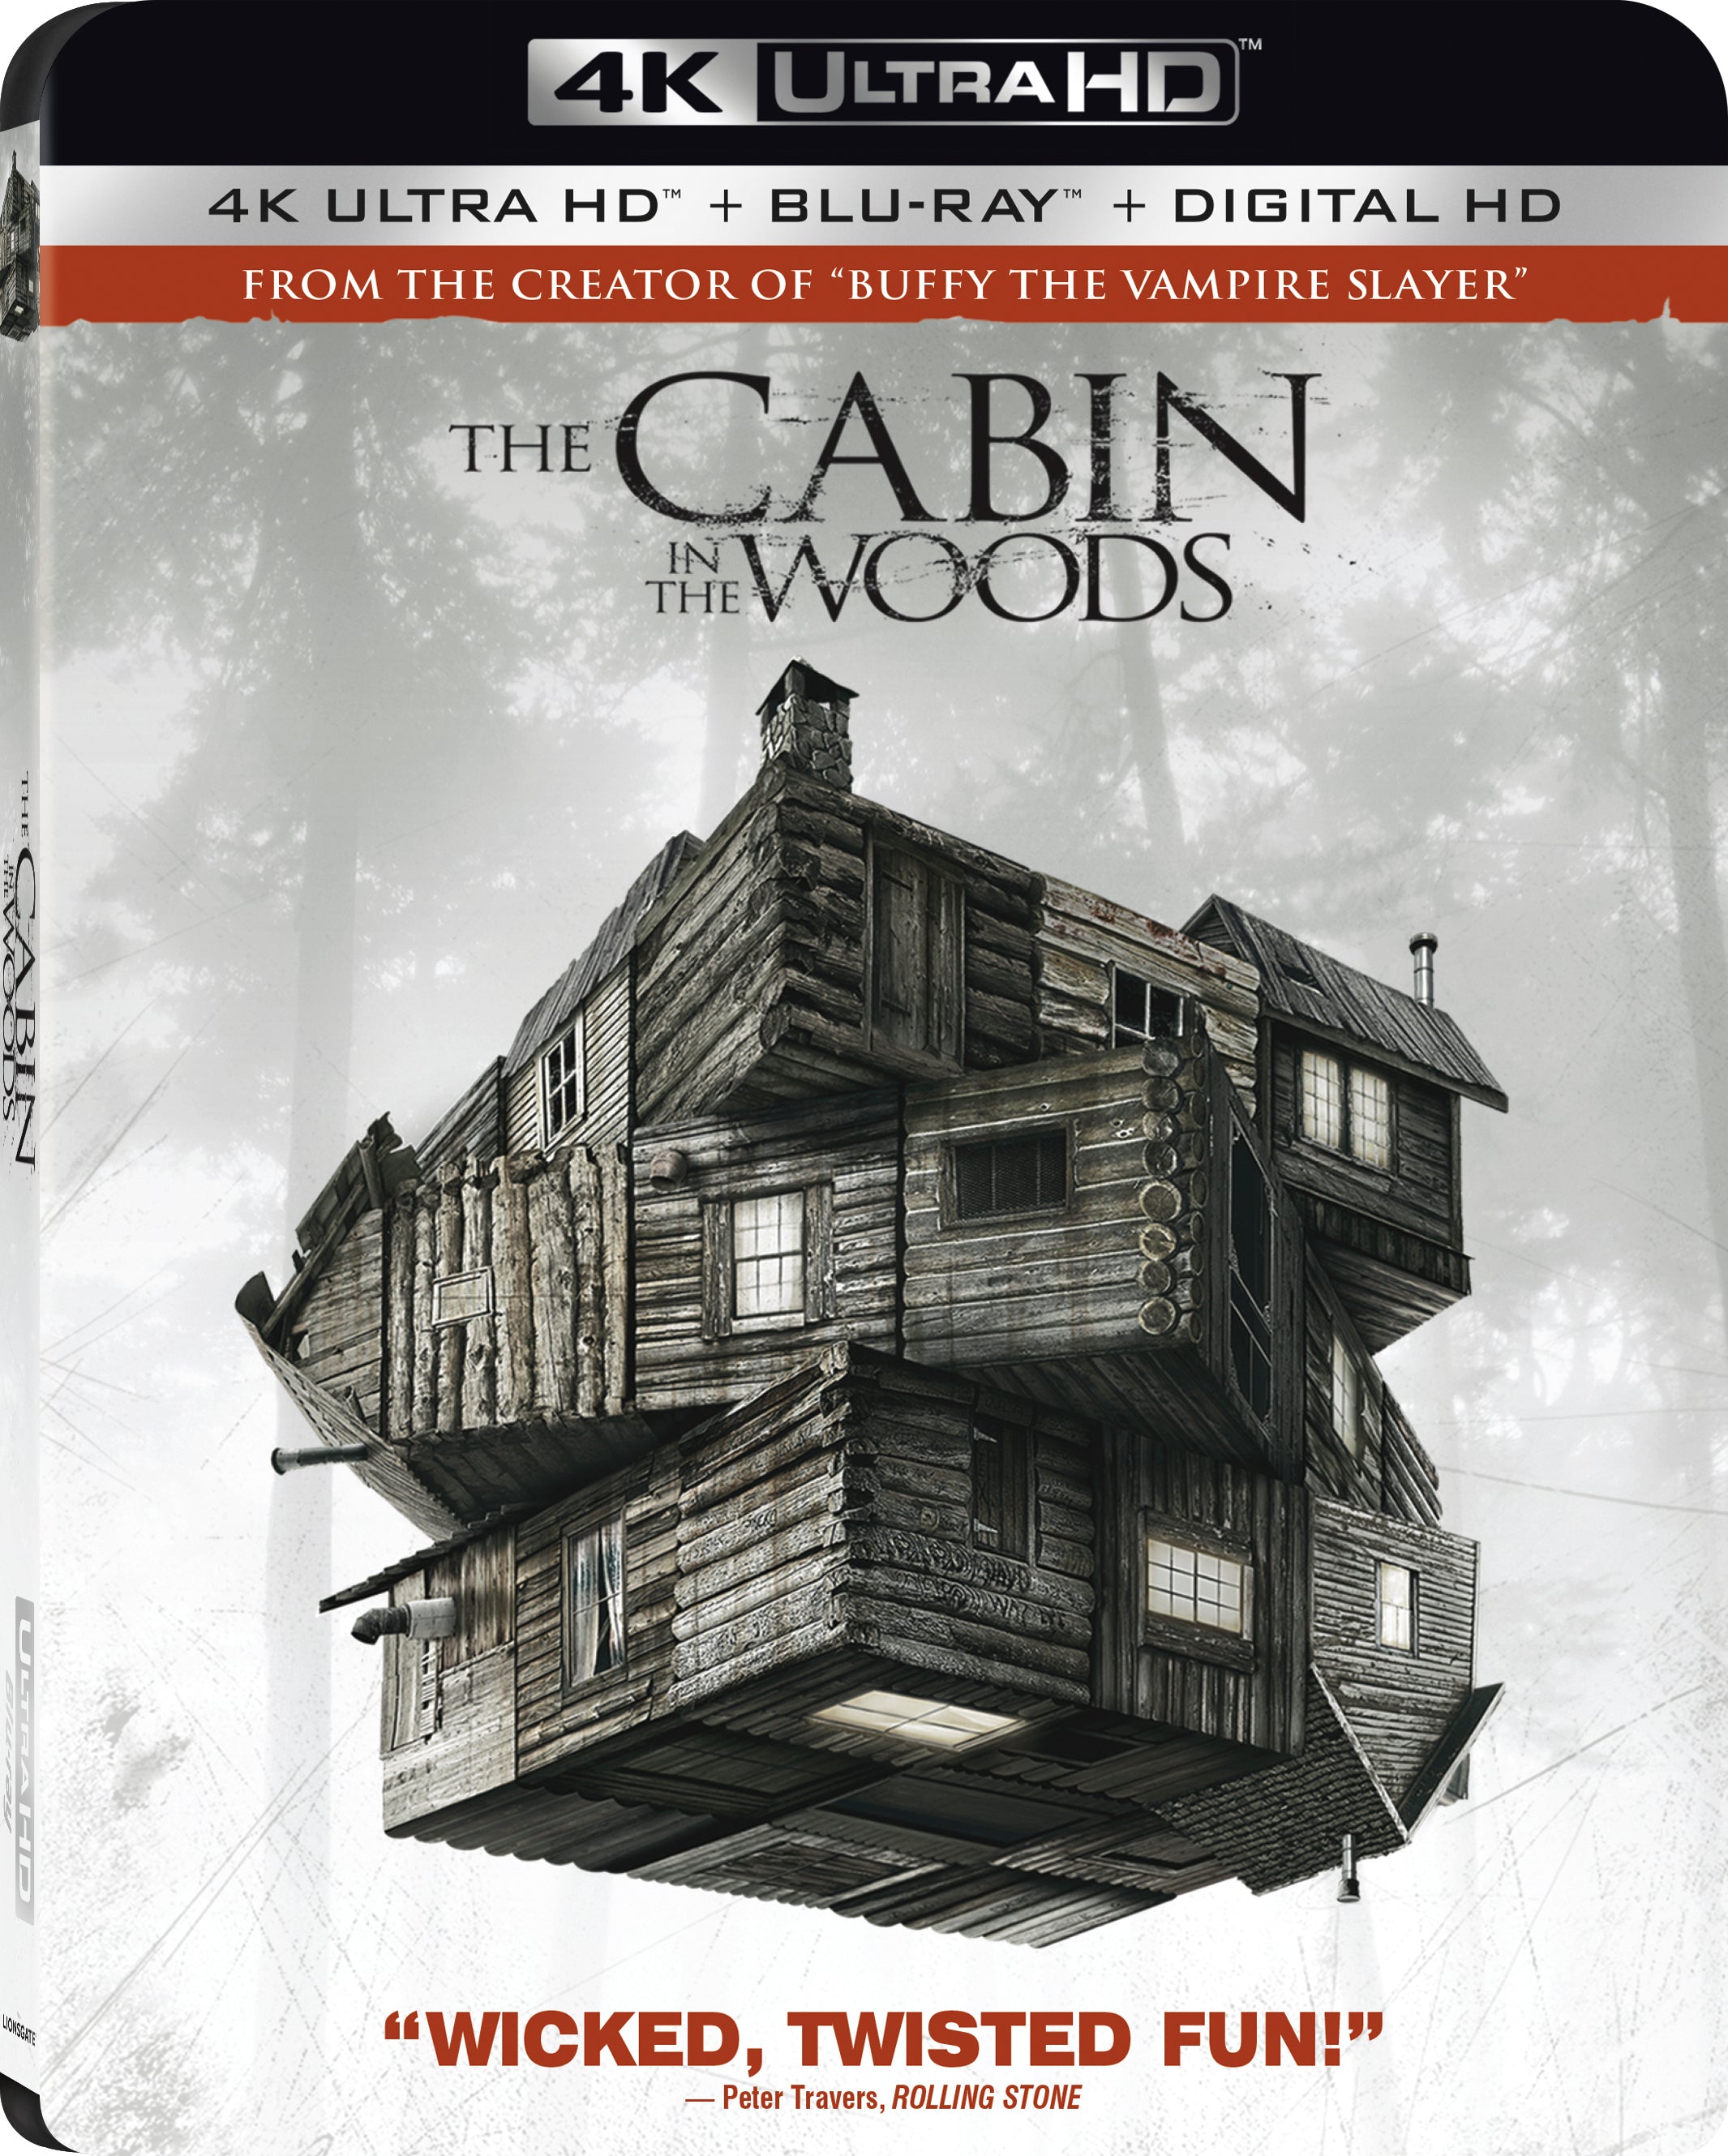 THE CABIN IN THE WOODS 4K UHD/BLU-RAY